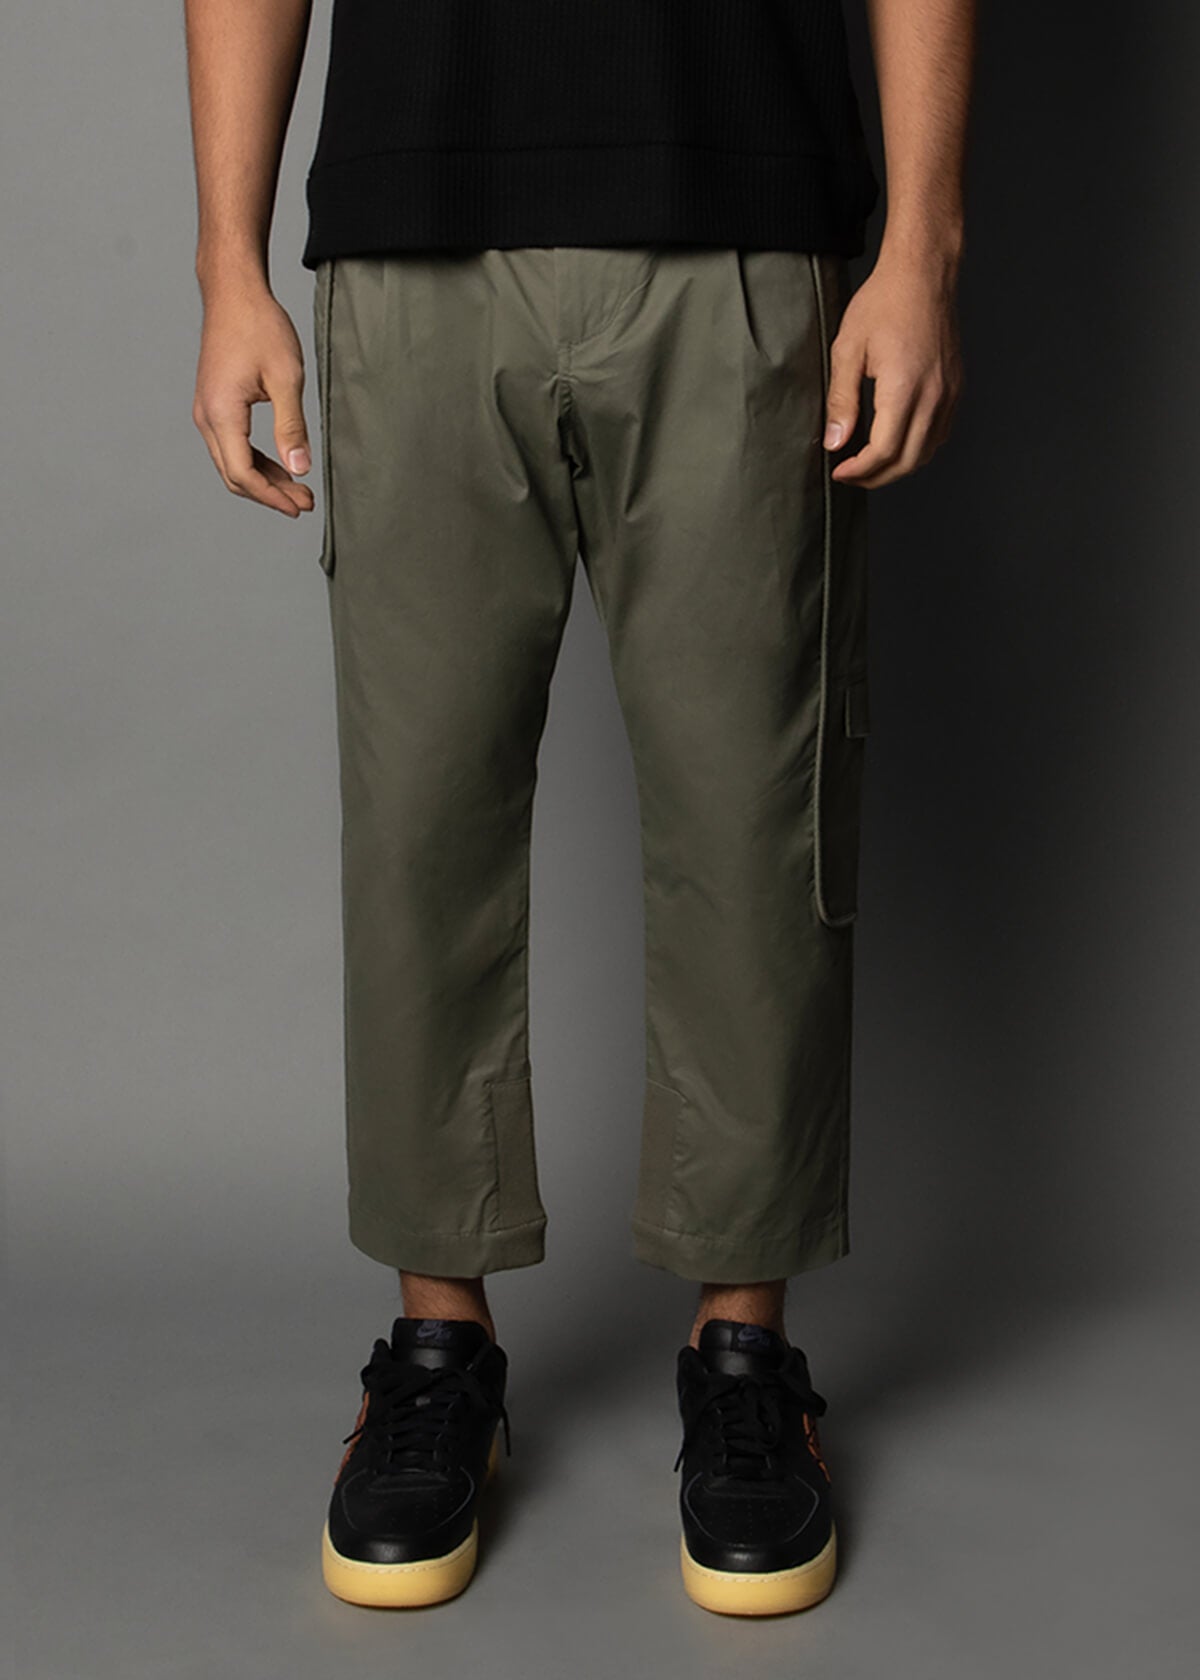 green cargo style mens pants